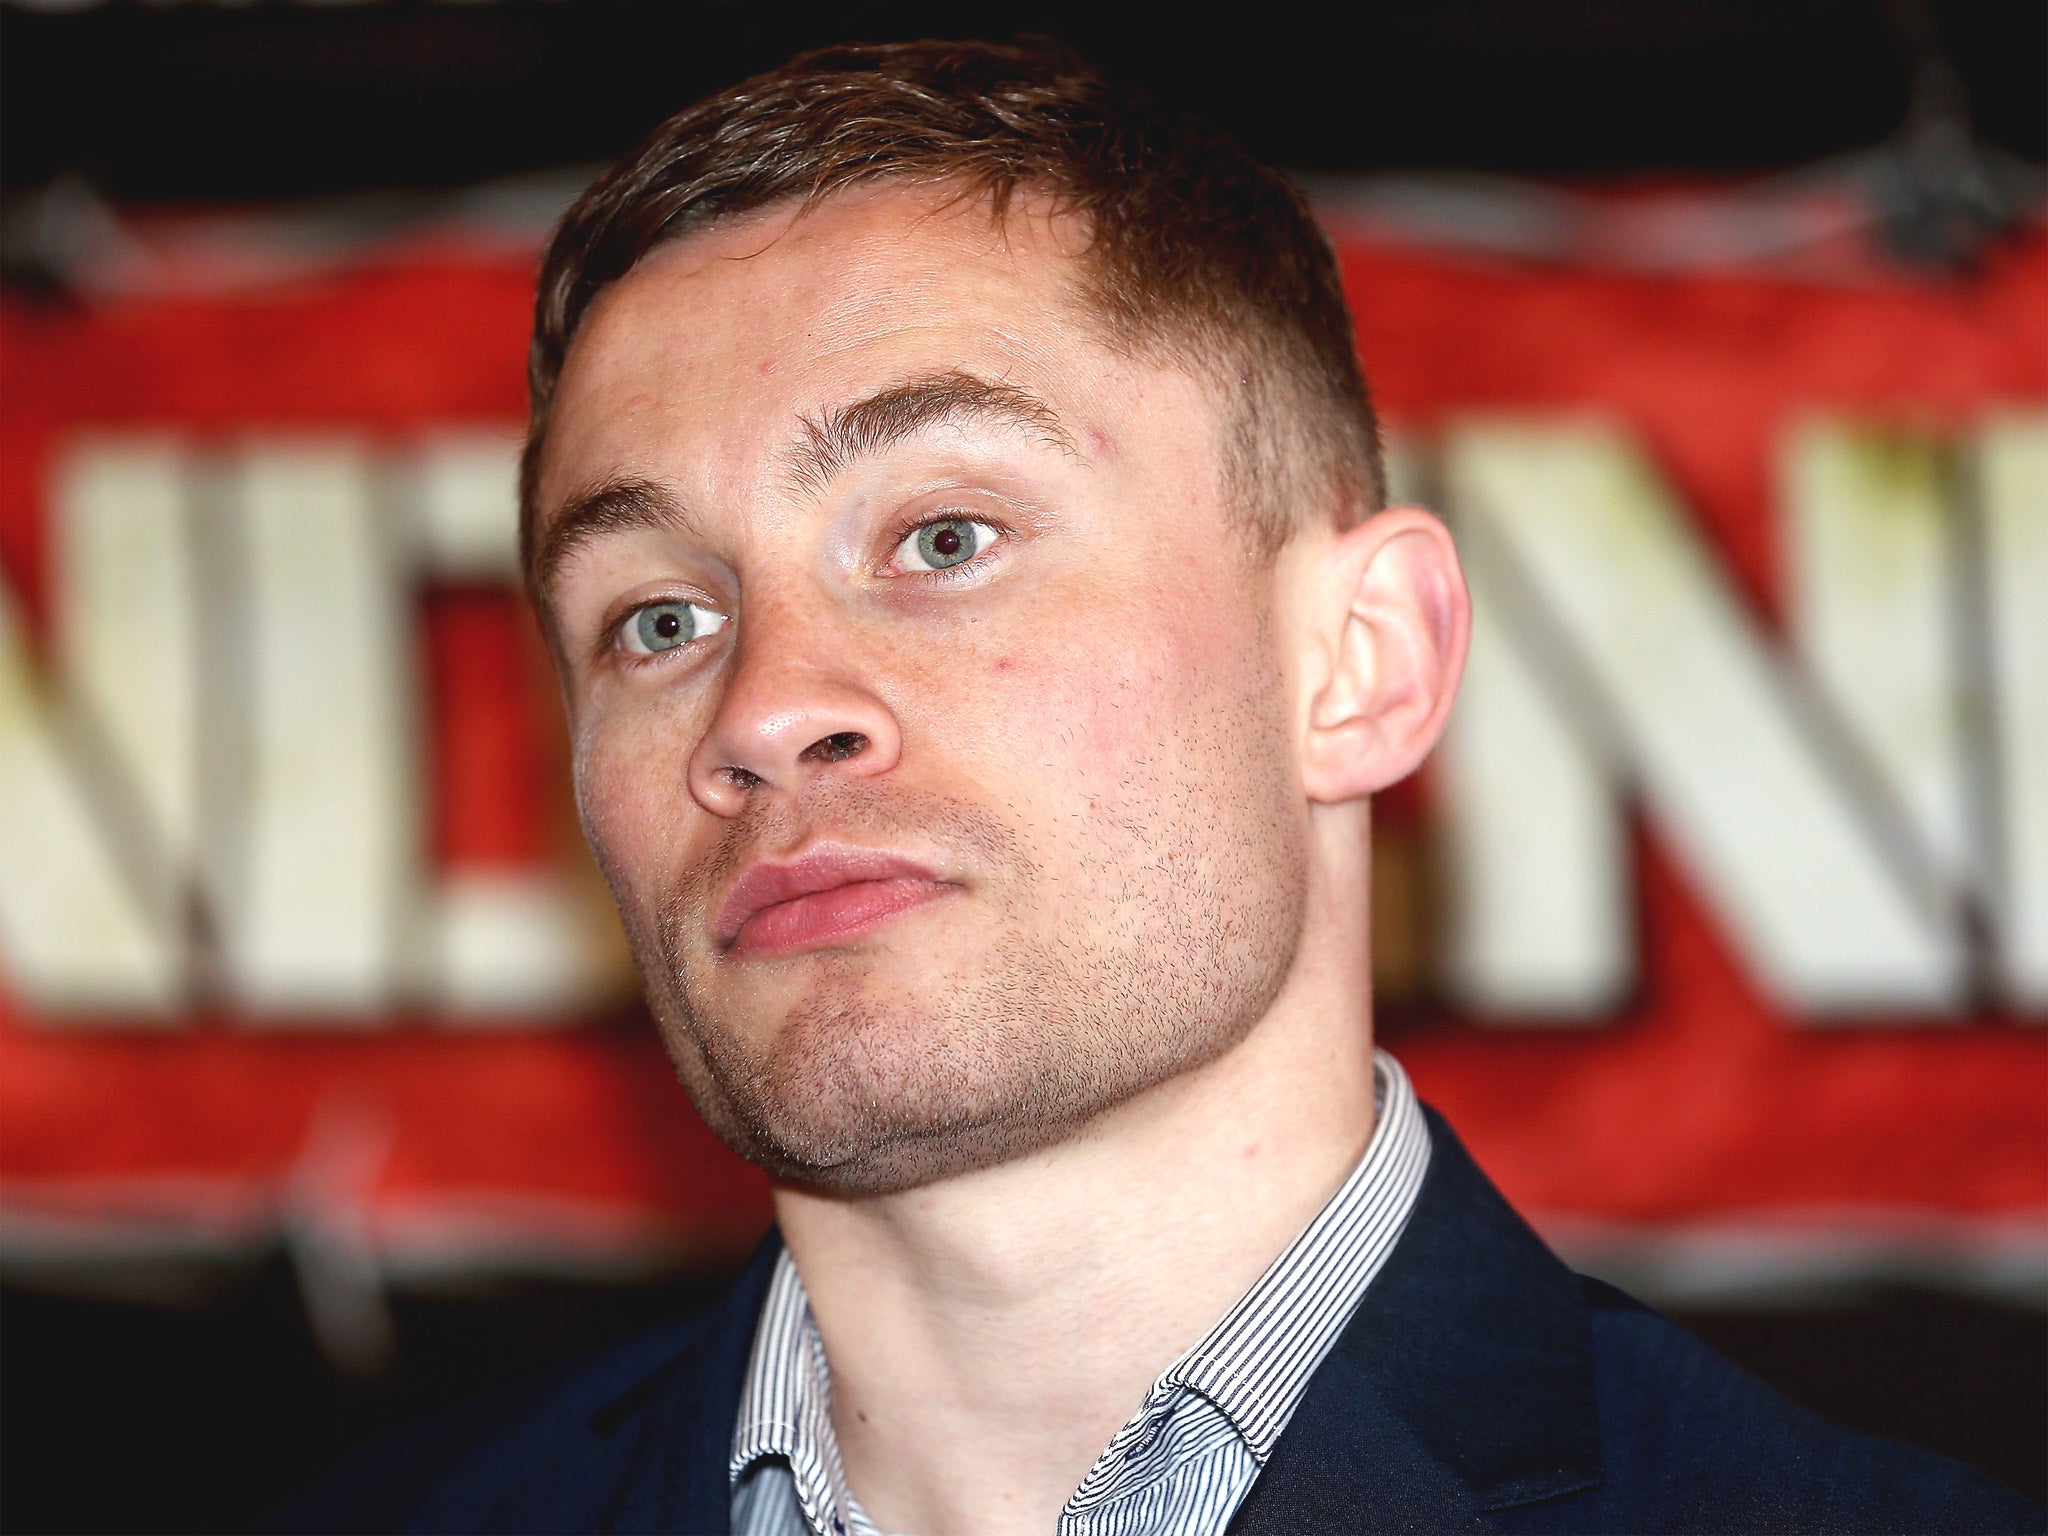 Belfast idol Carl Frampton says ‘The fans come out because they know they will get a real fight’